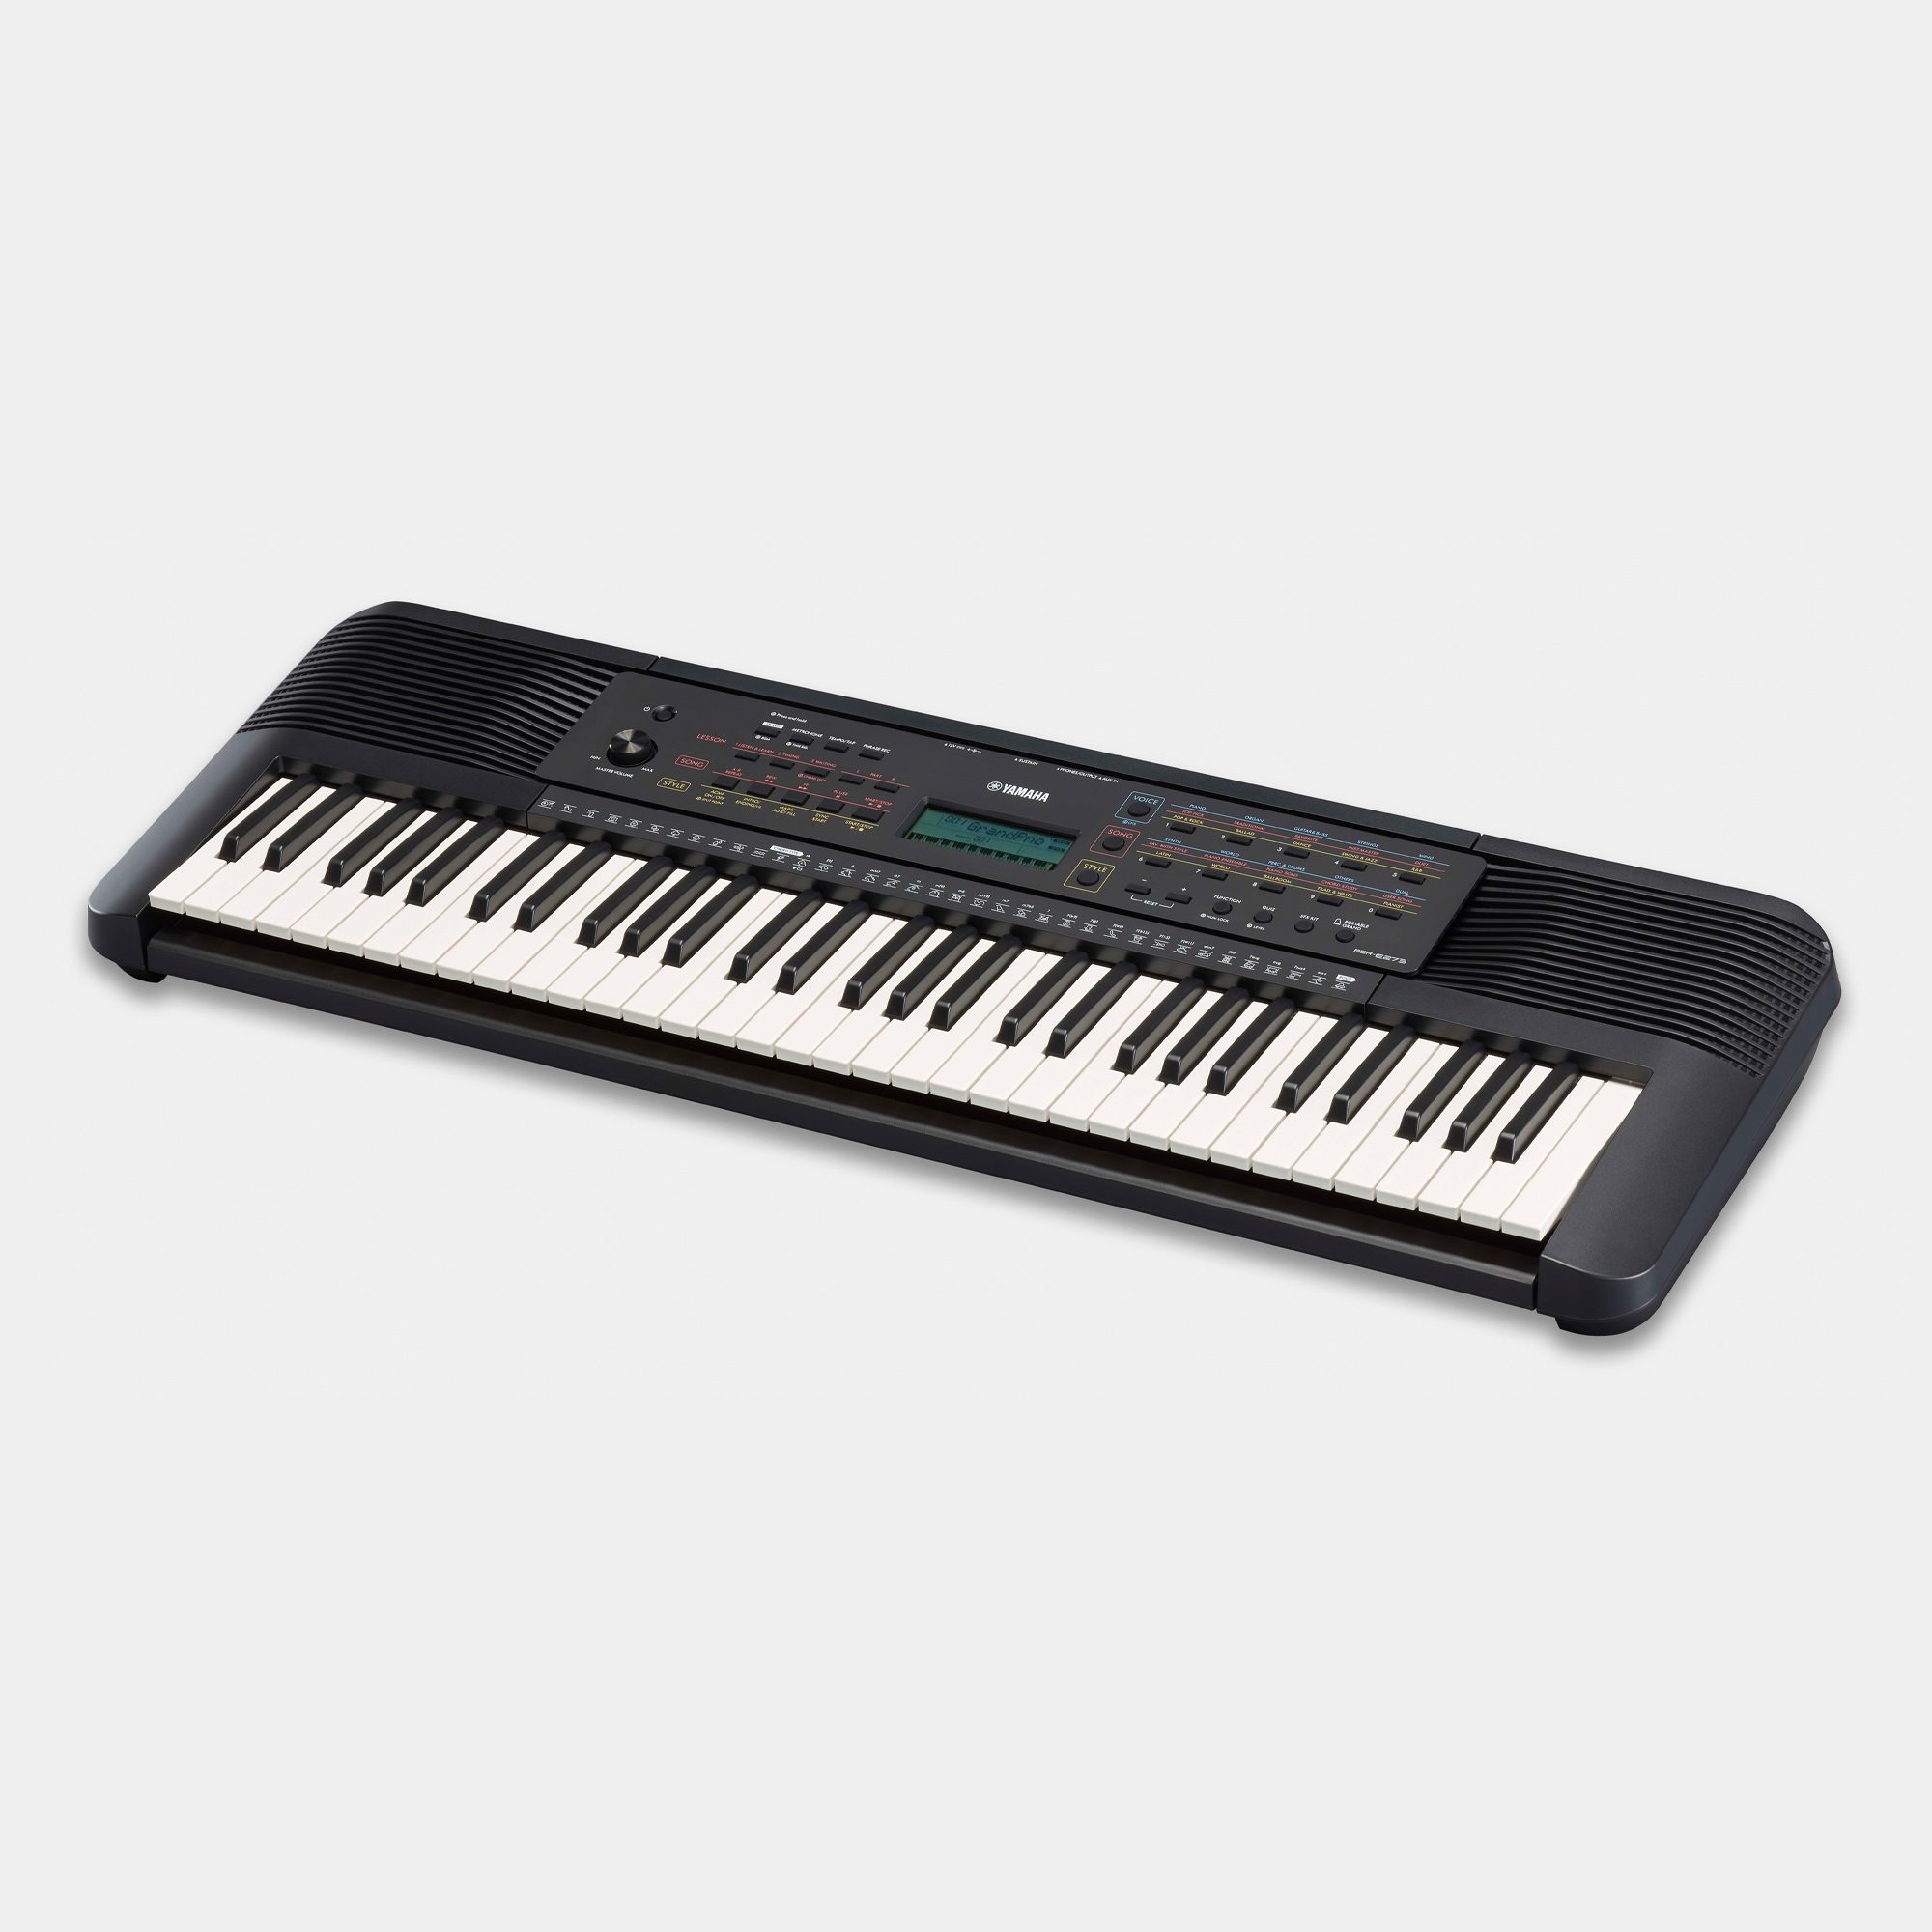 PSR-E273 - Overview - Portable Keyboards - Keyboard Instruments 